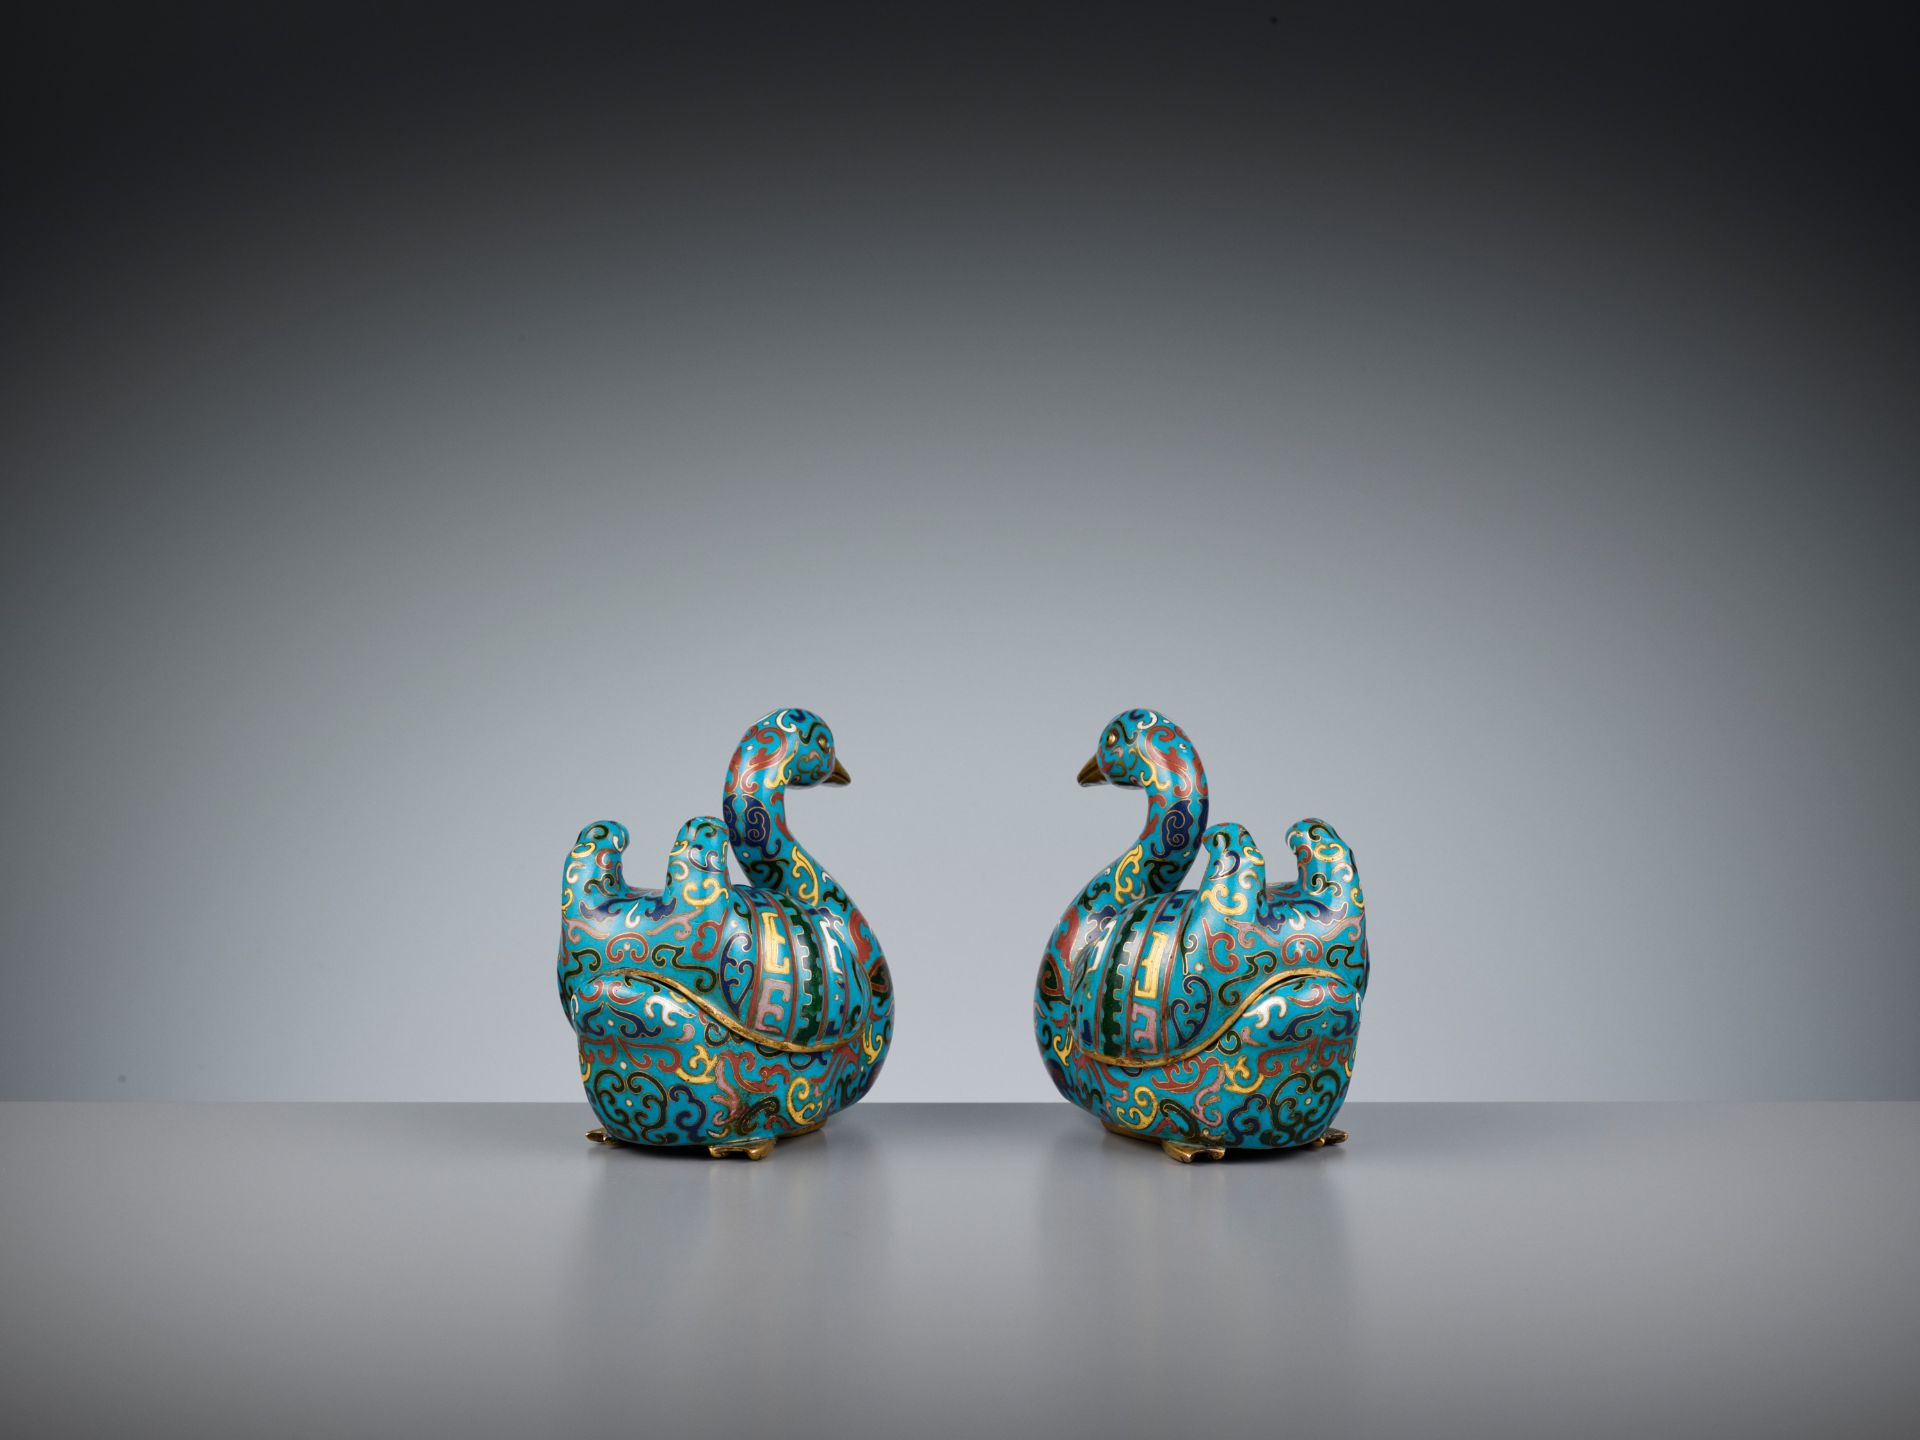 A PAIR OF GILT-BRONZE CLOISONNE ENAMEL 'DUCK' CENSER AND COVERS, LATE QING DYNASTY - Image 3 of 11